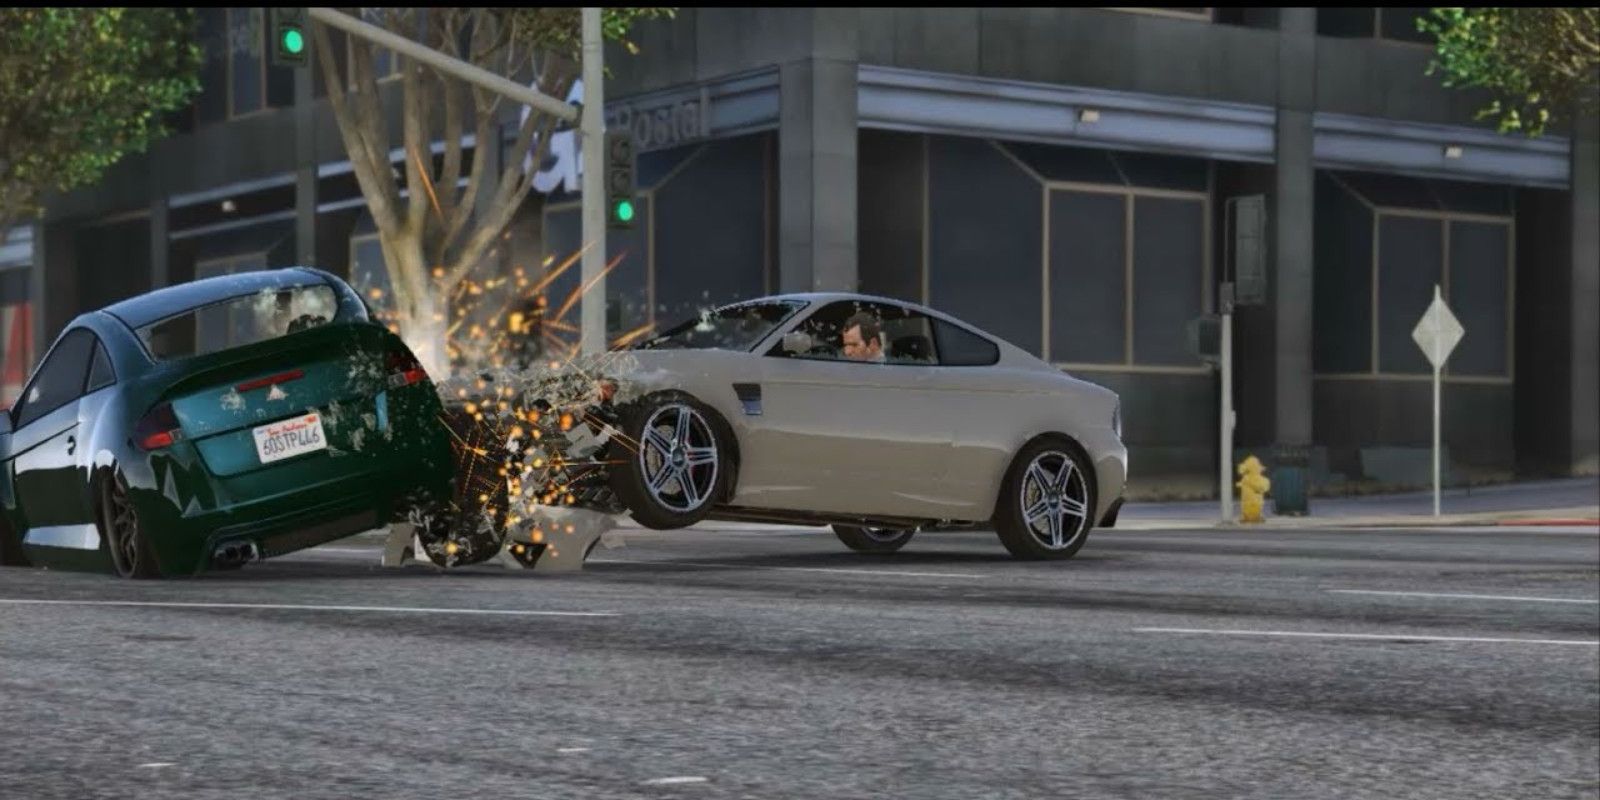 Two cars colliding in GTA 5.